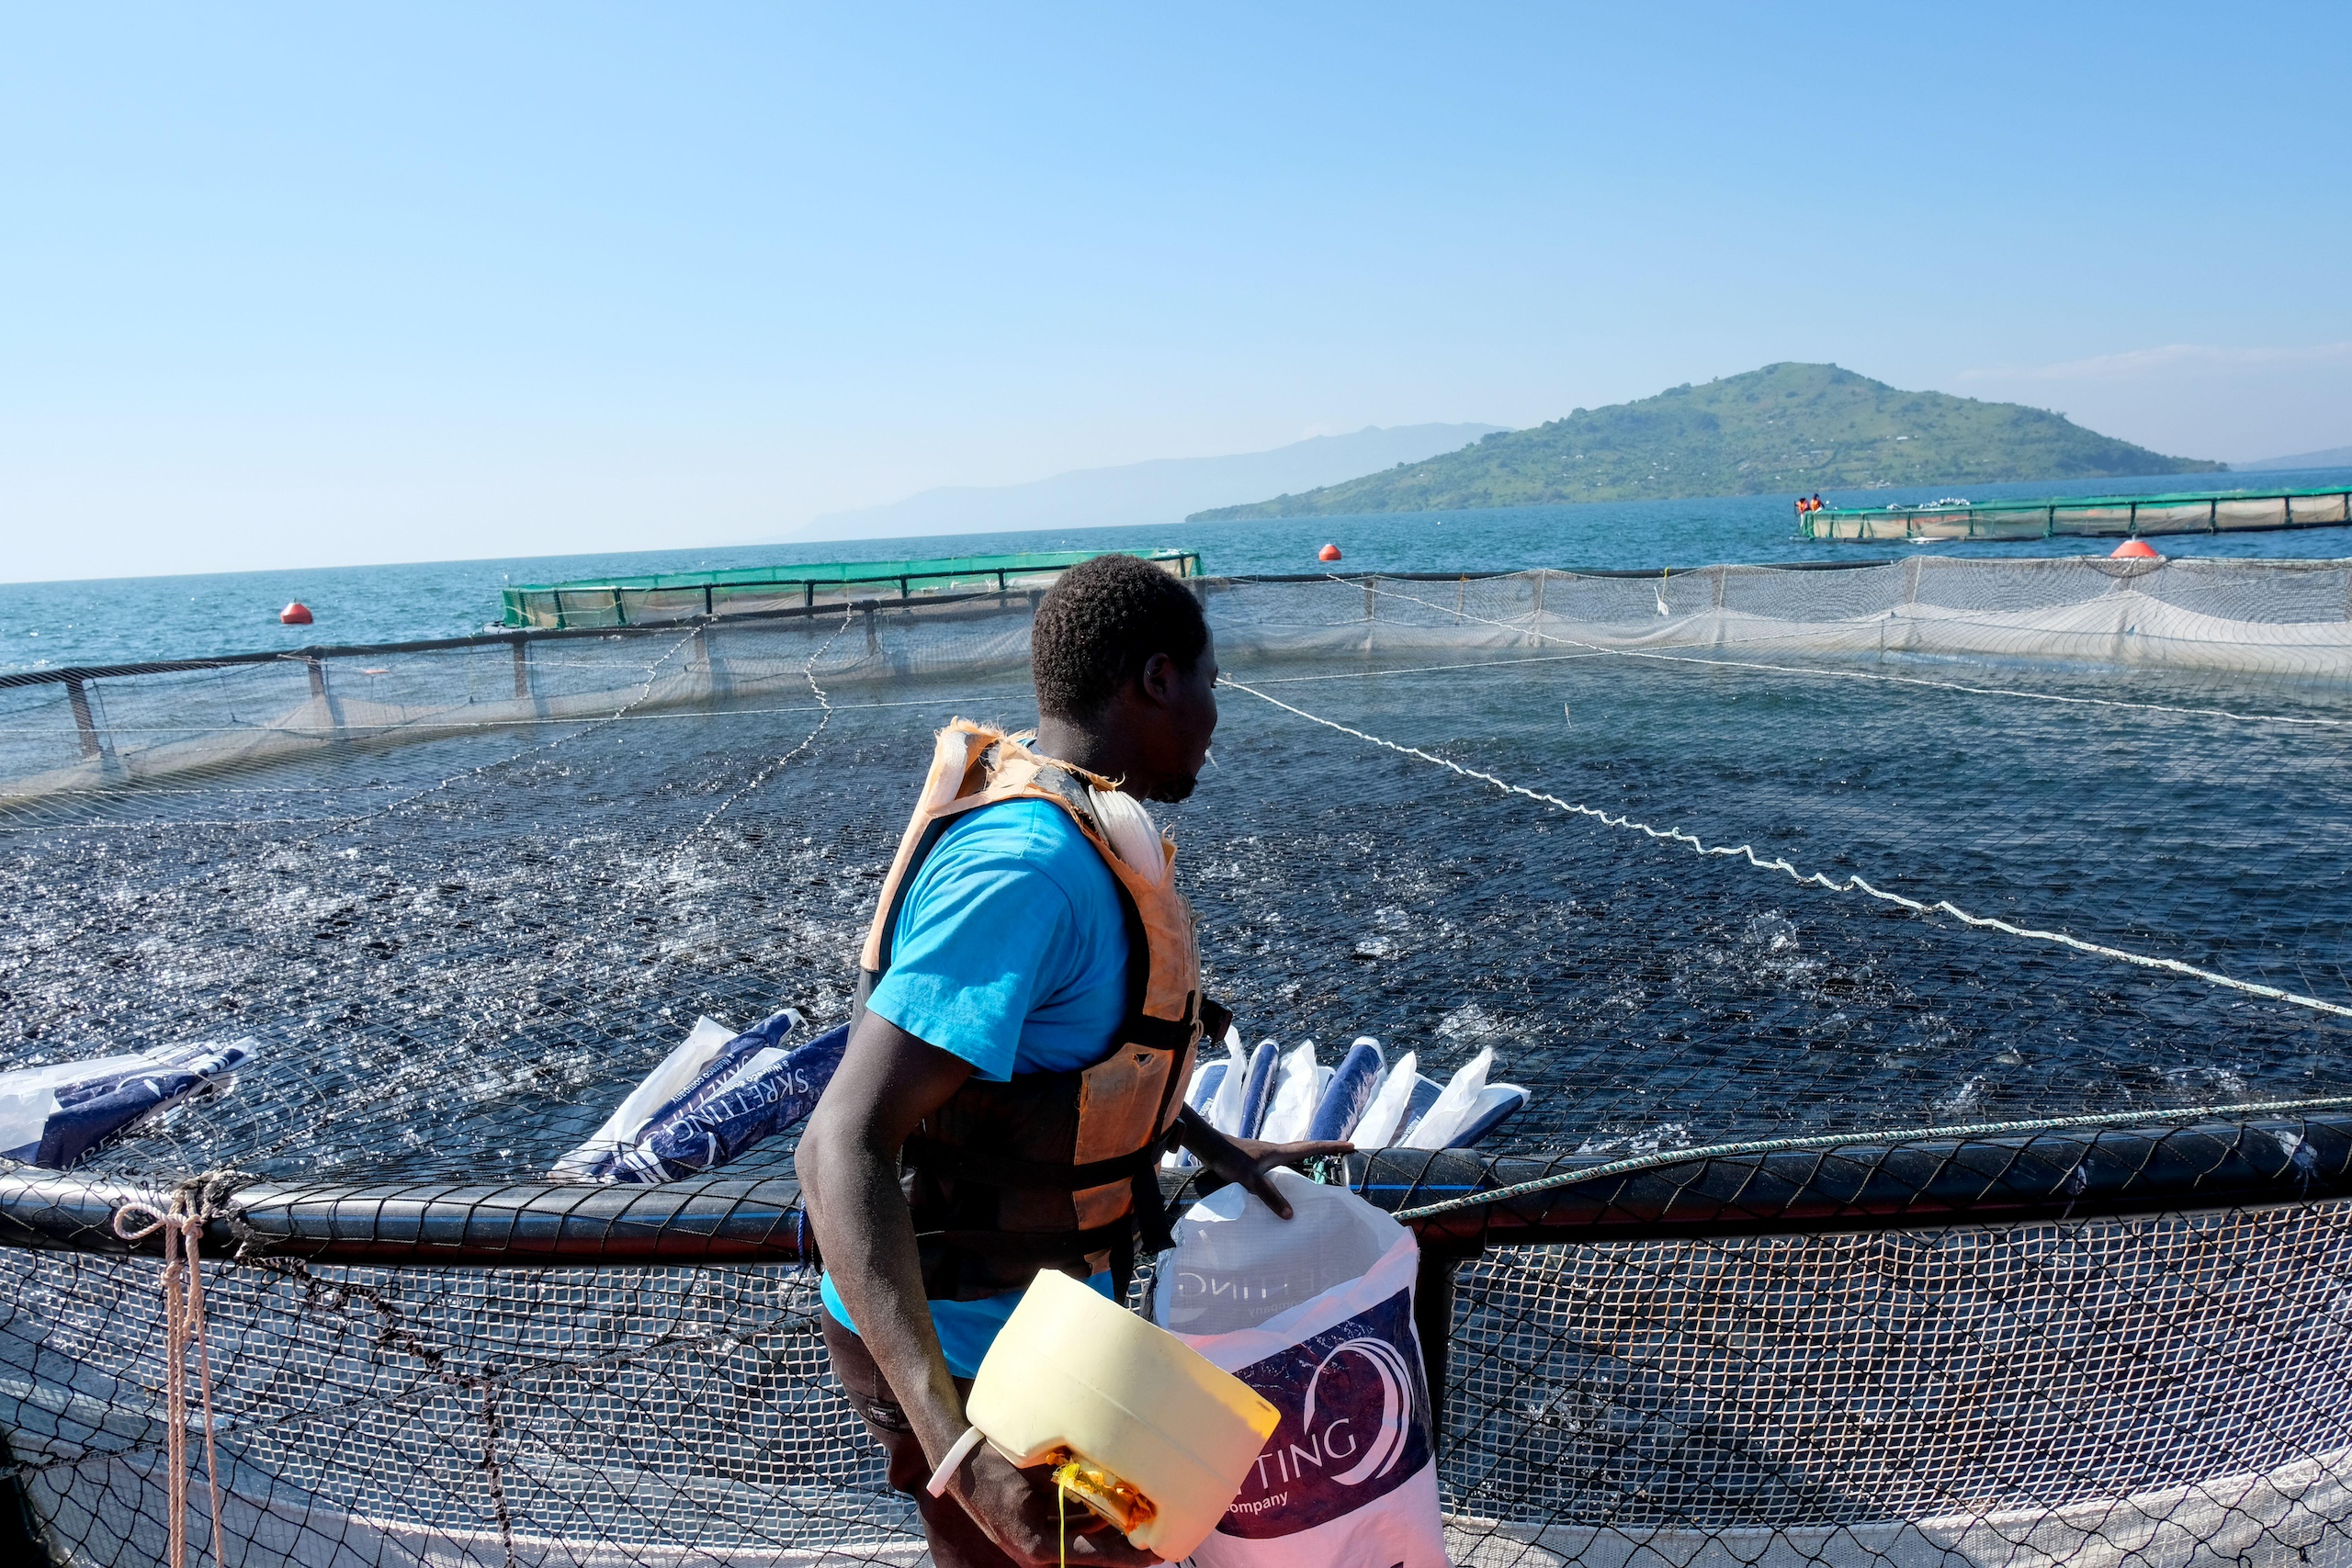 <p>A man feeding tilapia at a fish farm on Lake Victoria, Kenya. Because farmed fish are often fed on processed fish caught at sea, the rapid growth of the aquaculture industry has put pressure on wild fish populations (Image: Africapics / Alamy)</p>